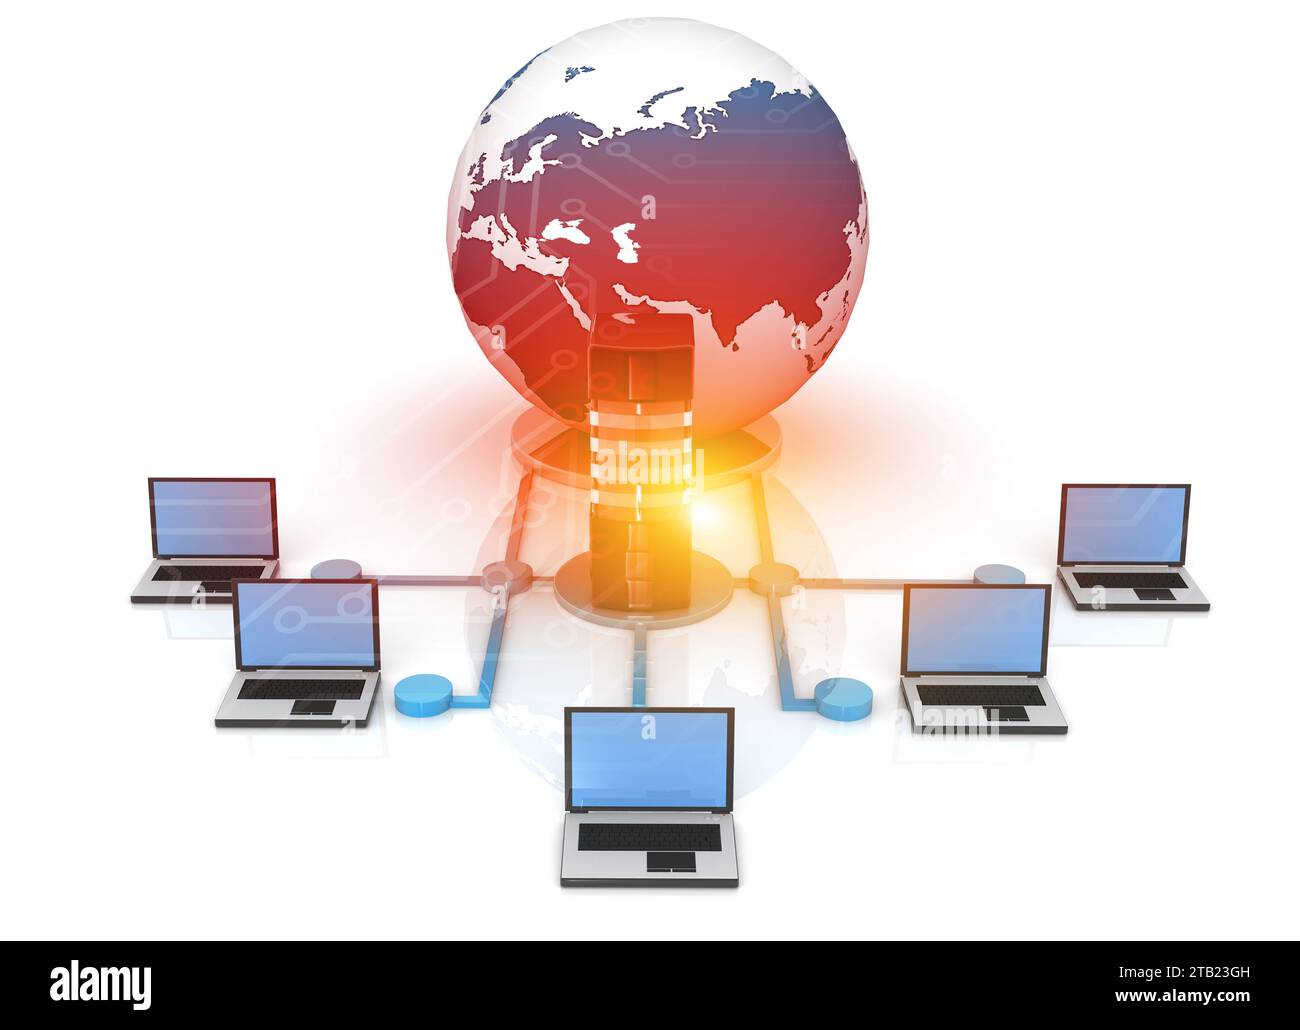 Global Computer networking. Server with laptops.  3d illustration Stock Photo